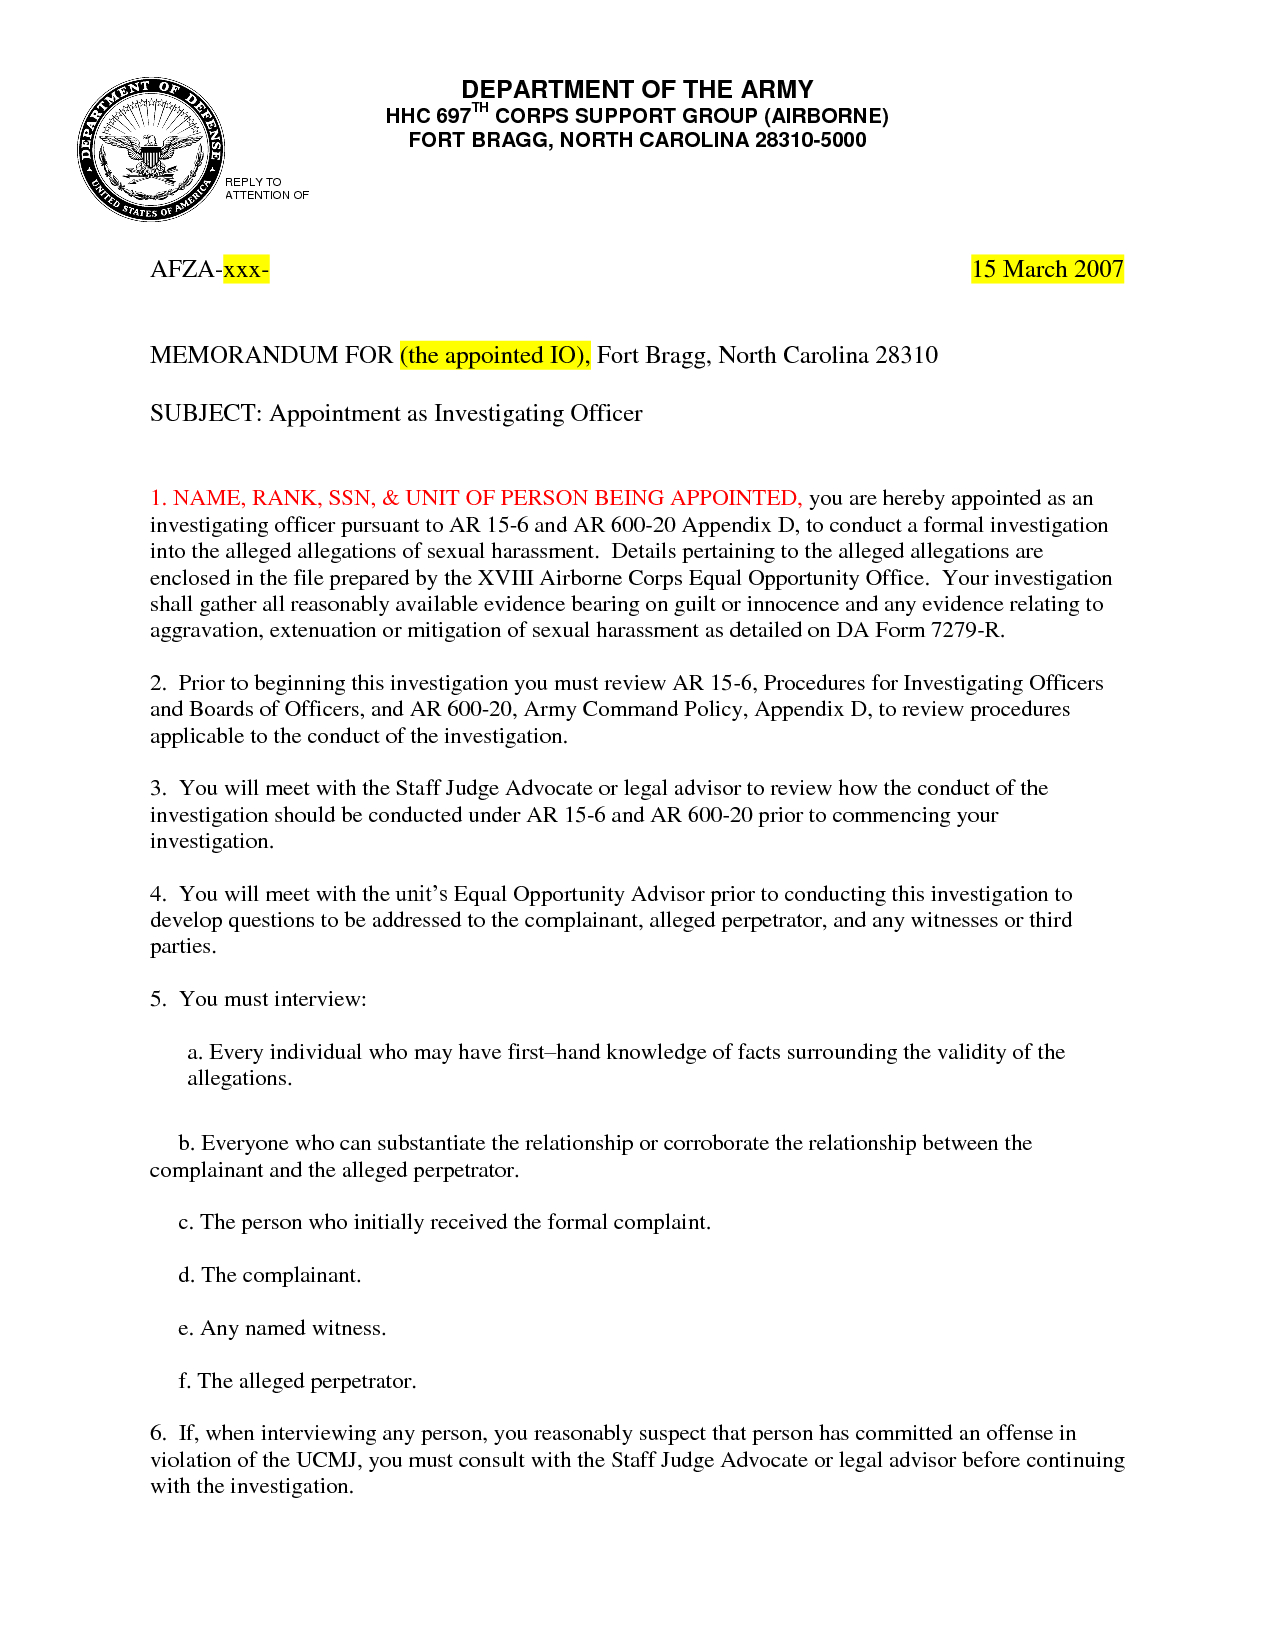 Army Memo Example Template | Free Cover Letter Templates In Army Memorandum Template Word